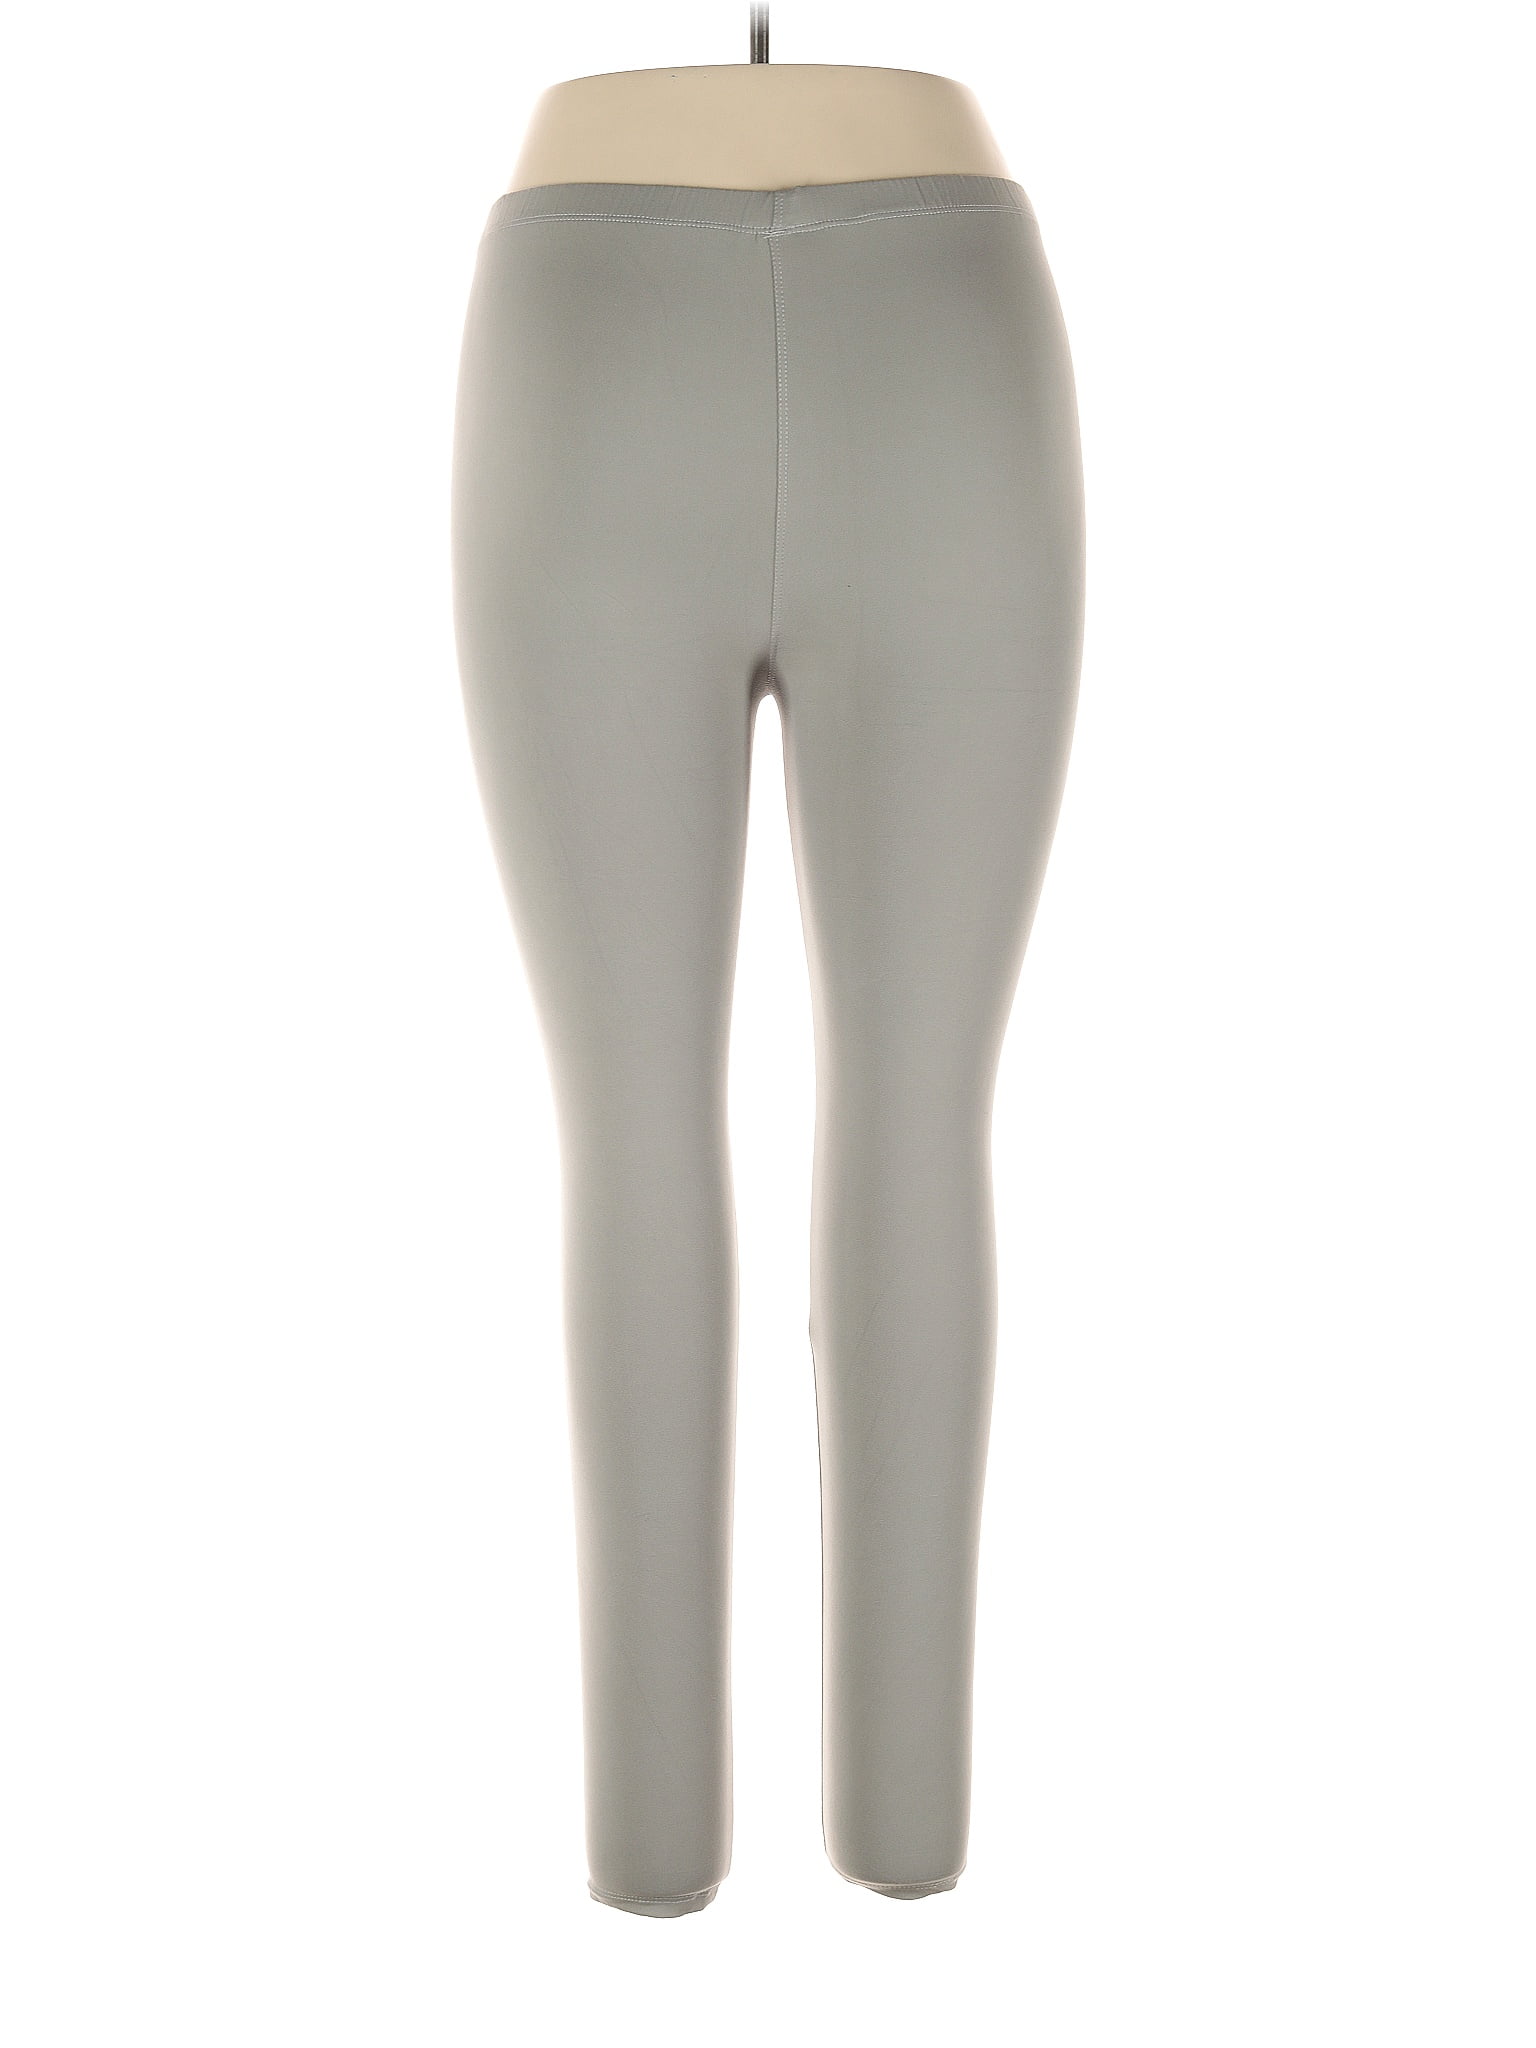 Homma Solid Gray Leggings Size XL - 63% off